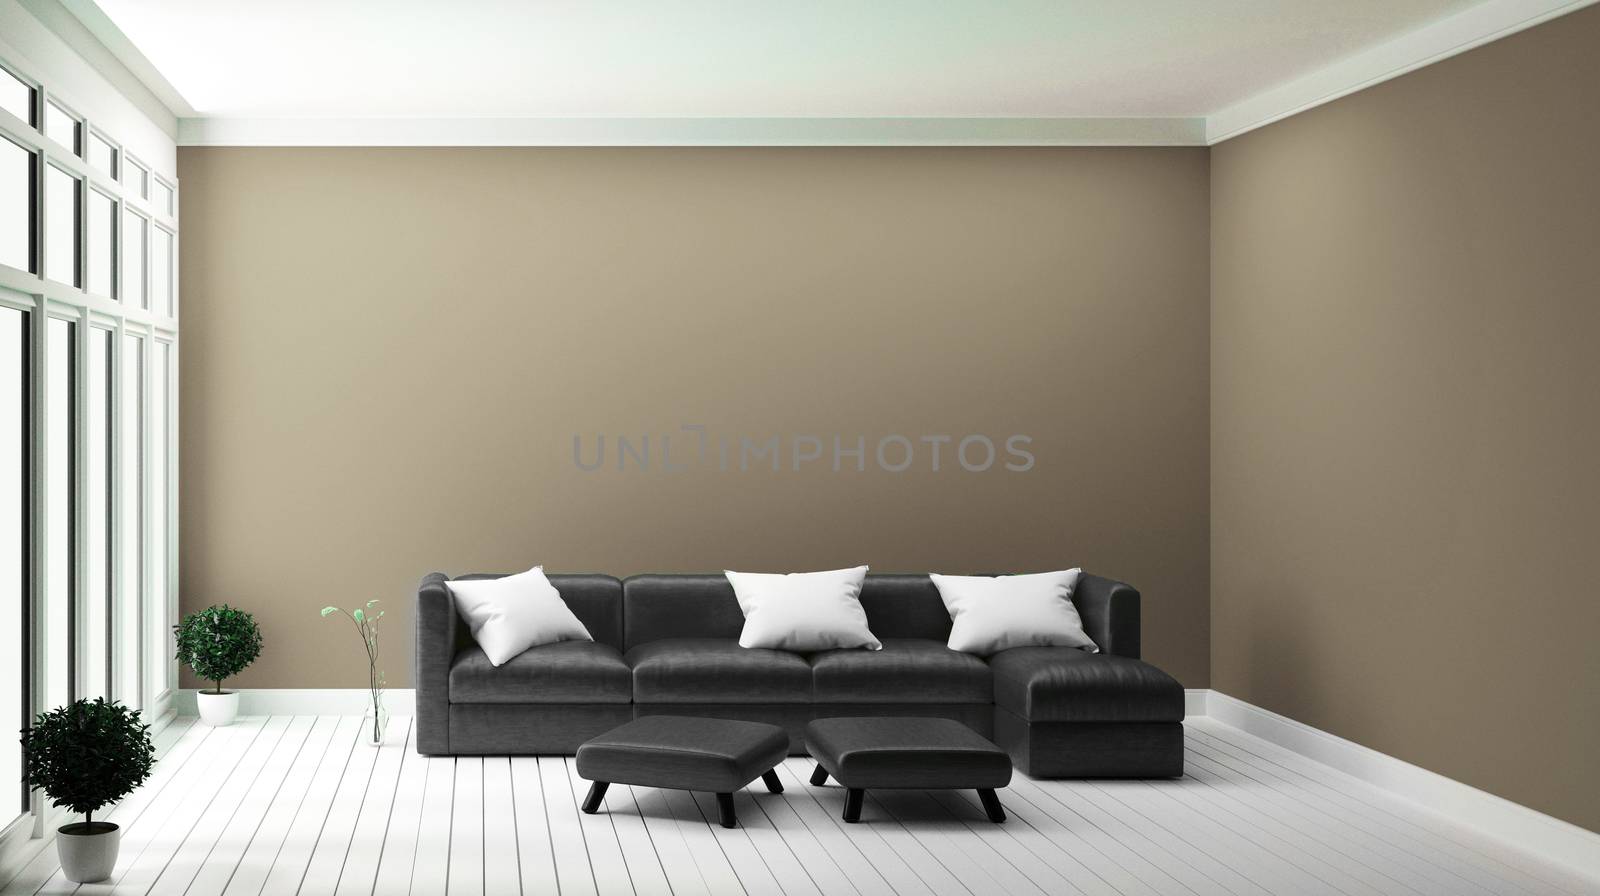 Design concept black sofa on brown wall modern interior .3d rend by Minny0012011@hotmail.com